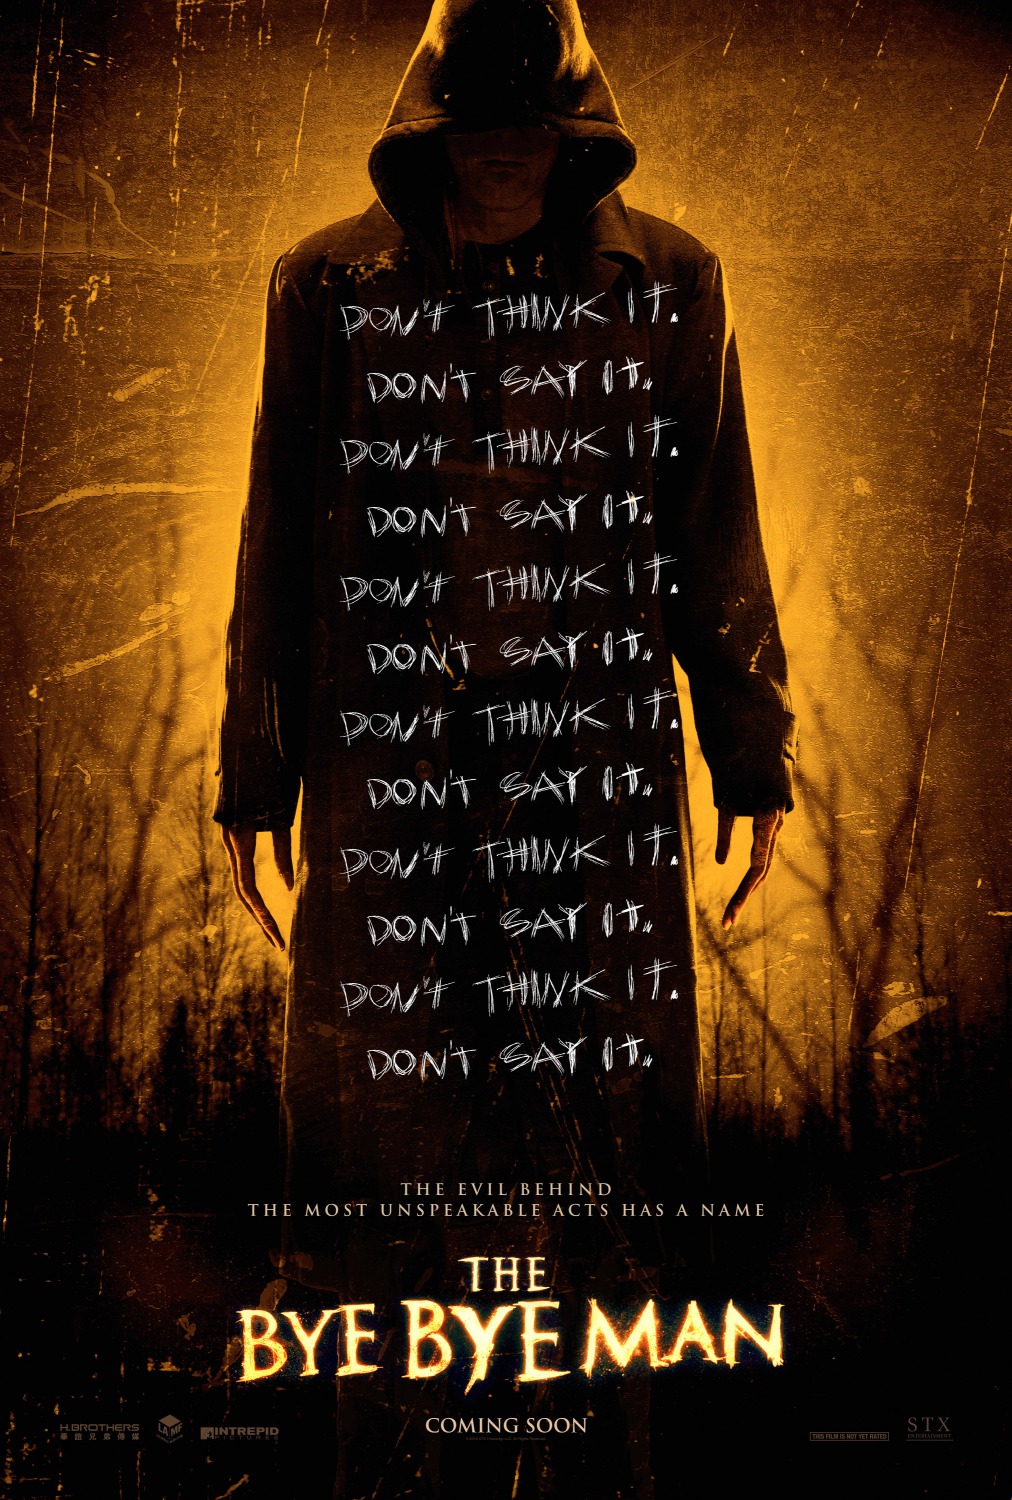 The Bye Bye Man film review – Don’t think it, don’t say it, don’t see it?